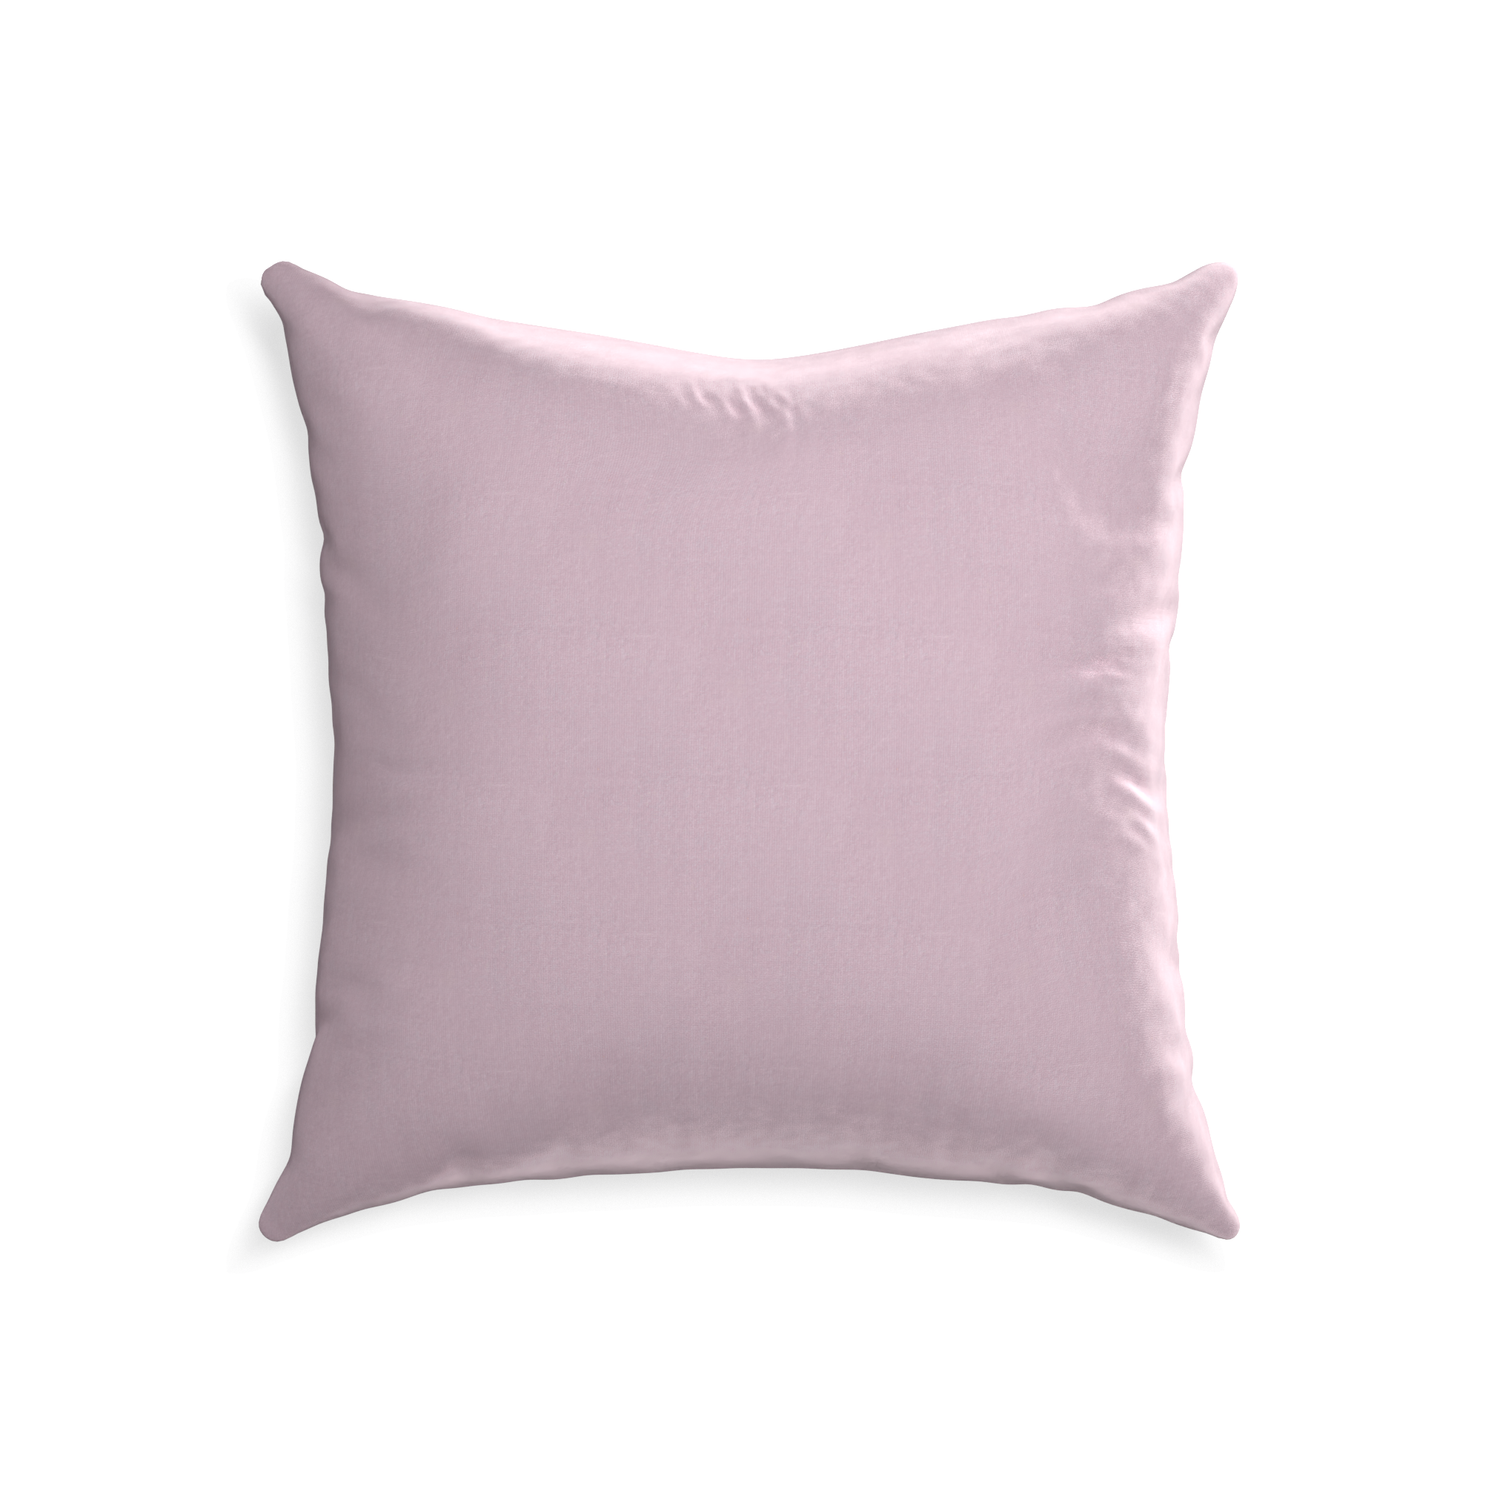 22-square lilac velvet custom pillow with none on white background